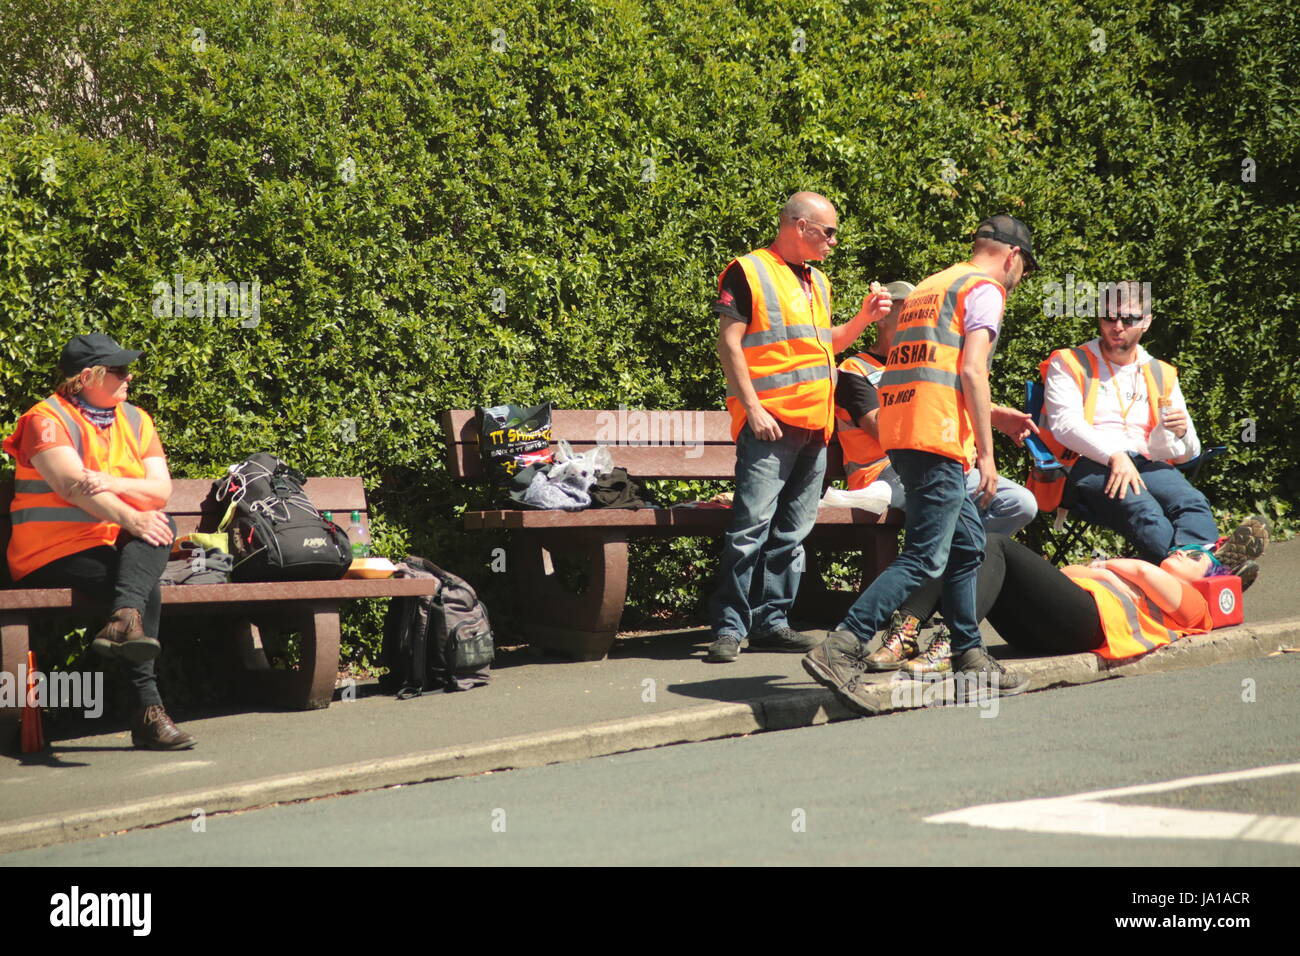 Isle of Man TT Races, Qualifying Practice Race, Saturday 3 June 2017.Sidecar Qualifying and Supersport/Lightweight/Newcomers (all classes) qualifying session. Marshals relaxing in the sunshine in between the sessions. At Cruickshanks Corner, Ramsey, Isle of Man Credit: Eclectic Art and Photography/Alamy Live News Stock Photo